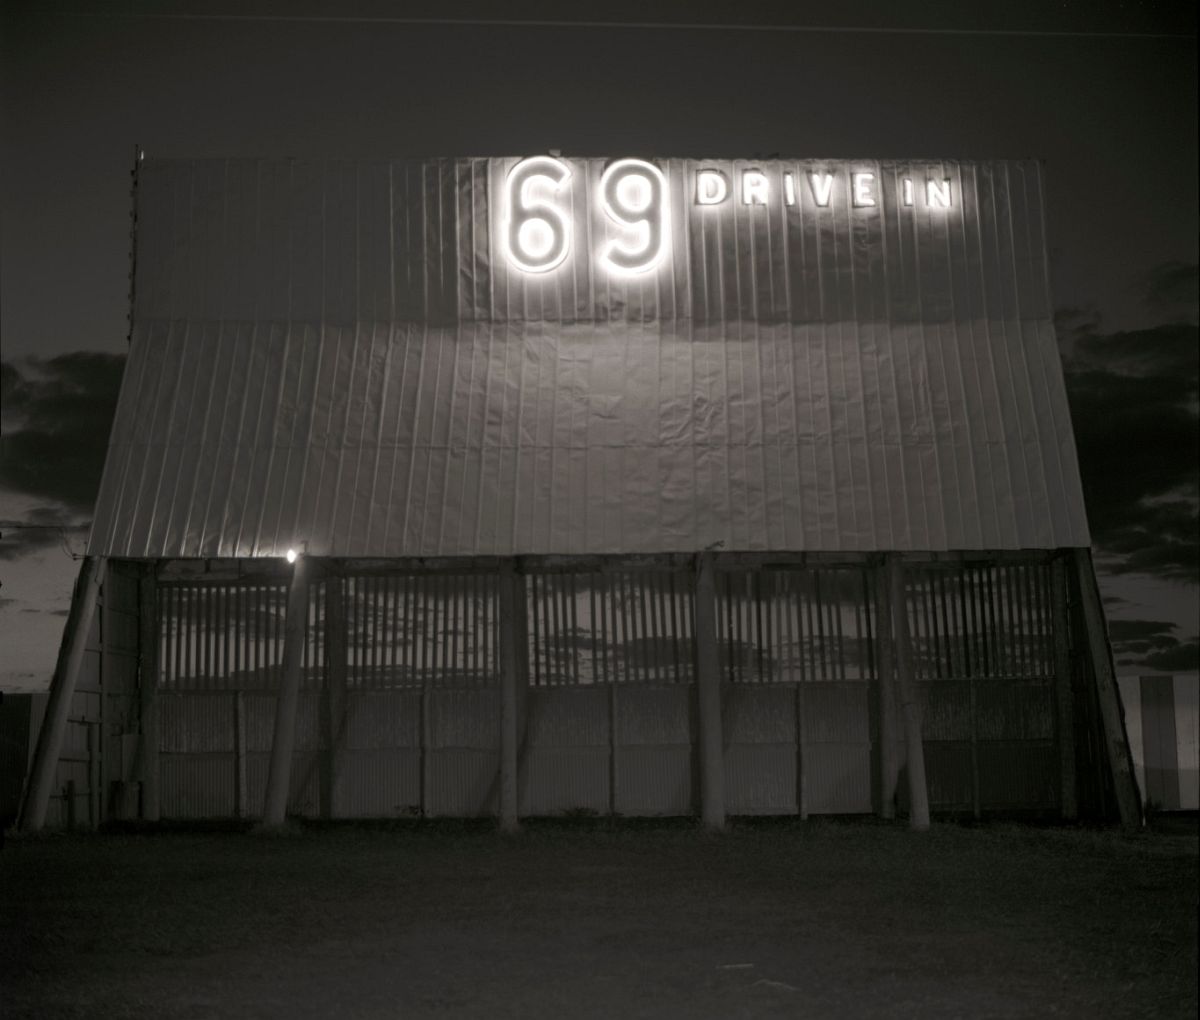 69 Drive-in Theater, Checotah, Oklahoma1974